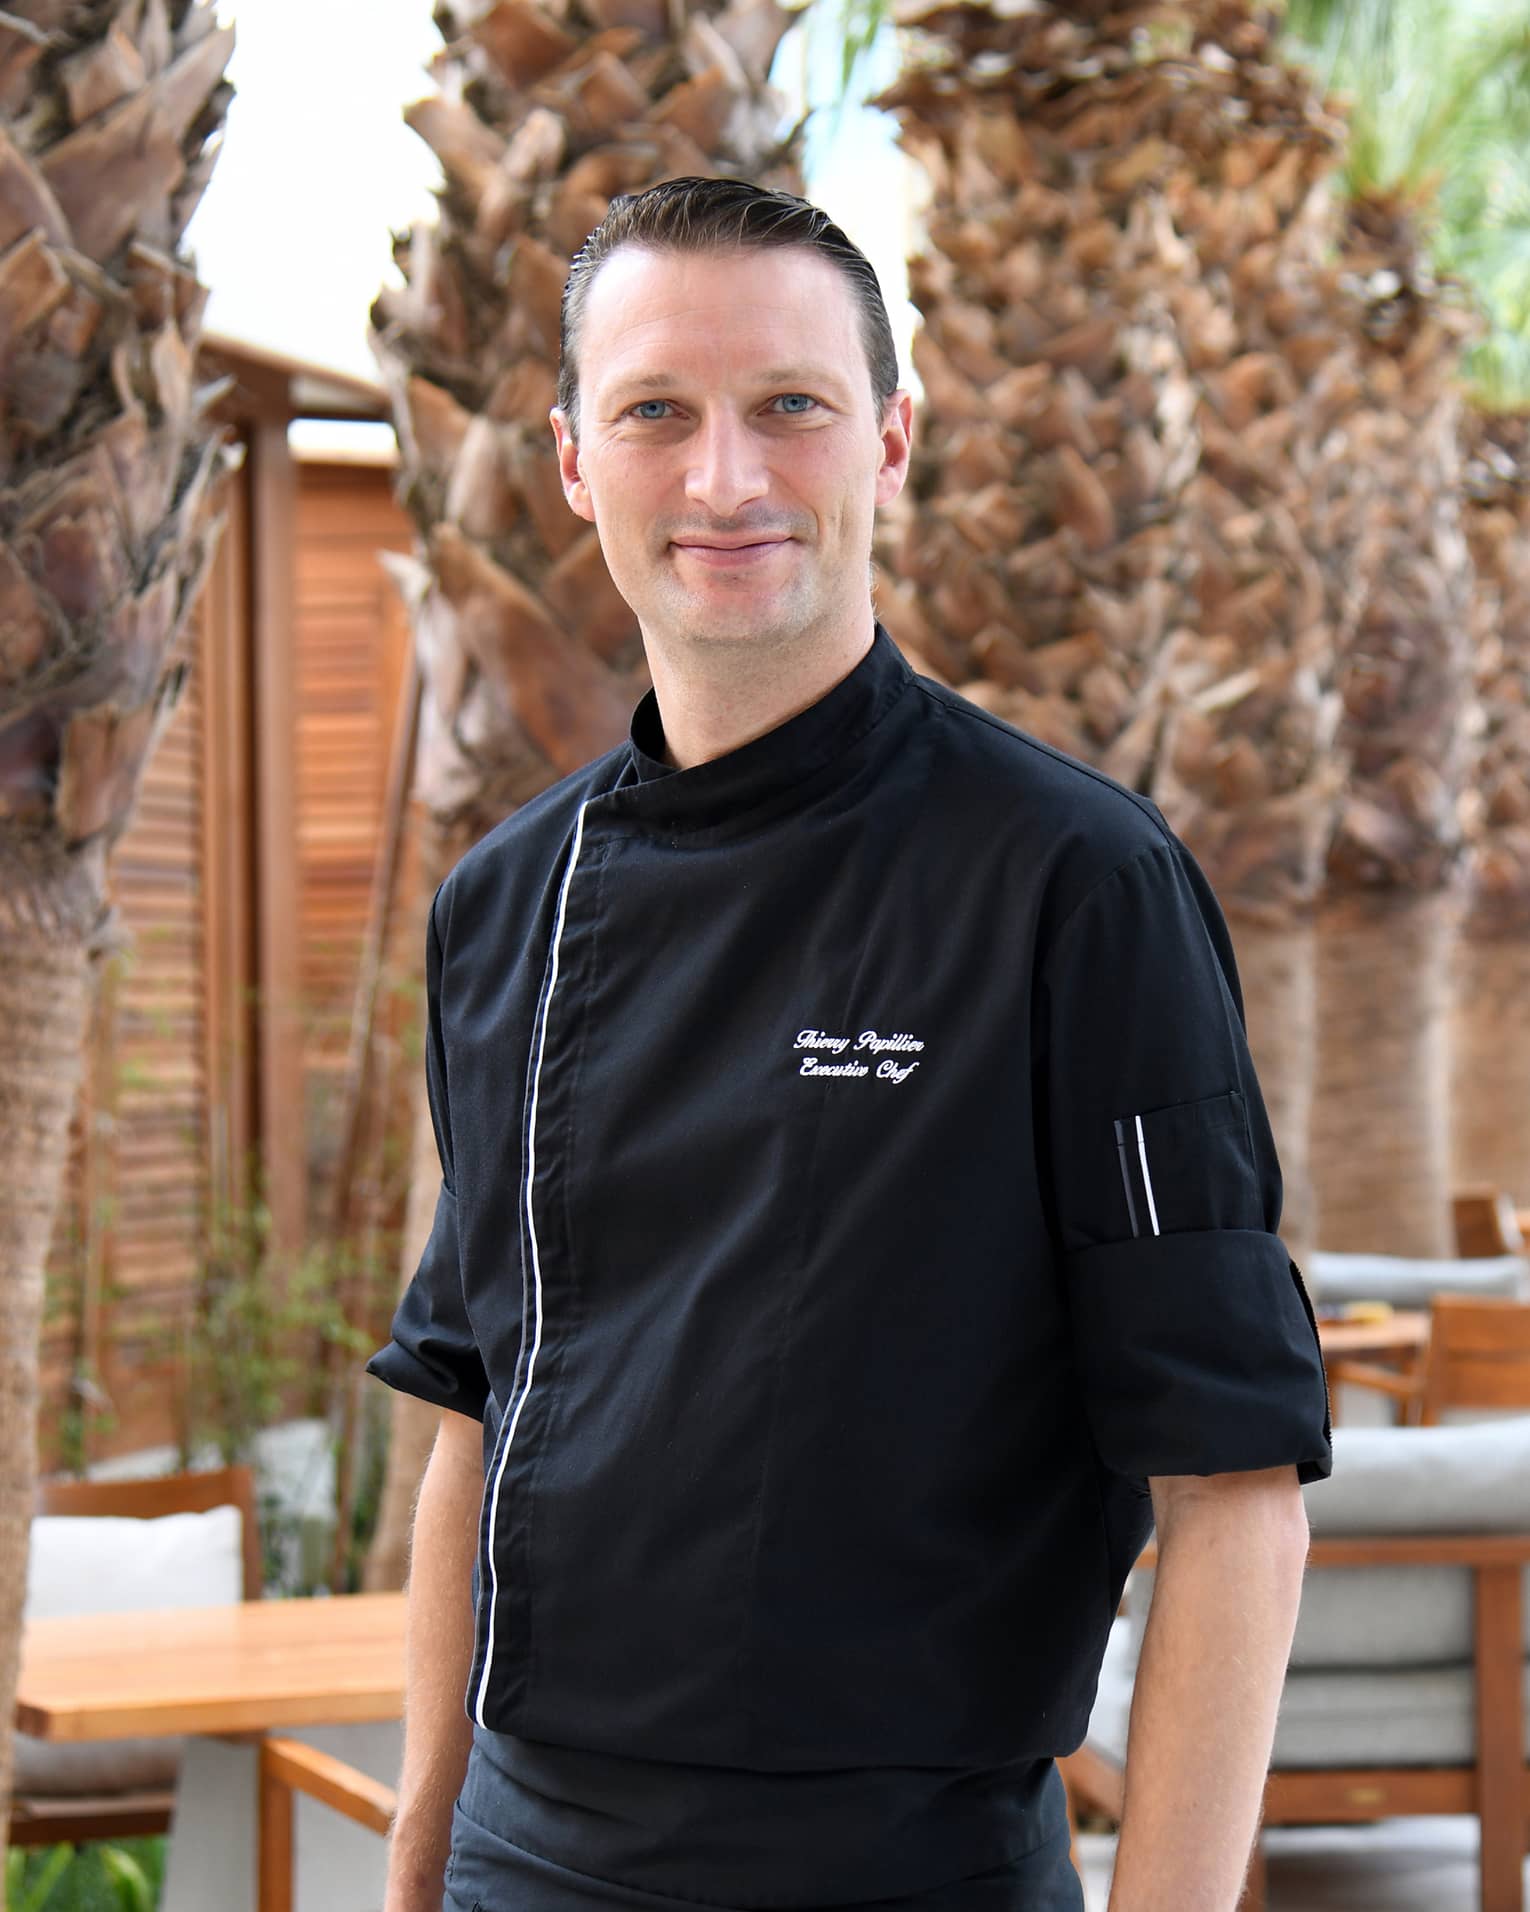 Chef Thierry Pillier stands looking at the camera wearing a black chef's jacket